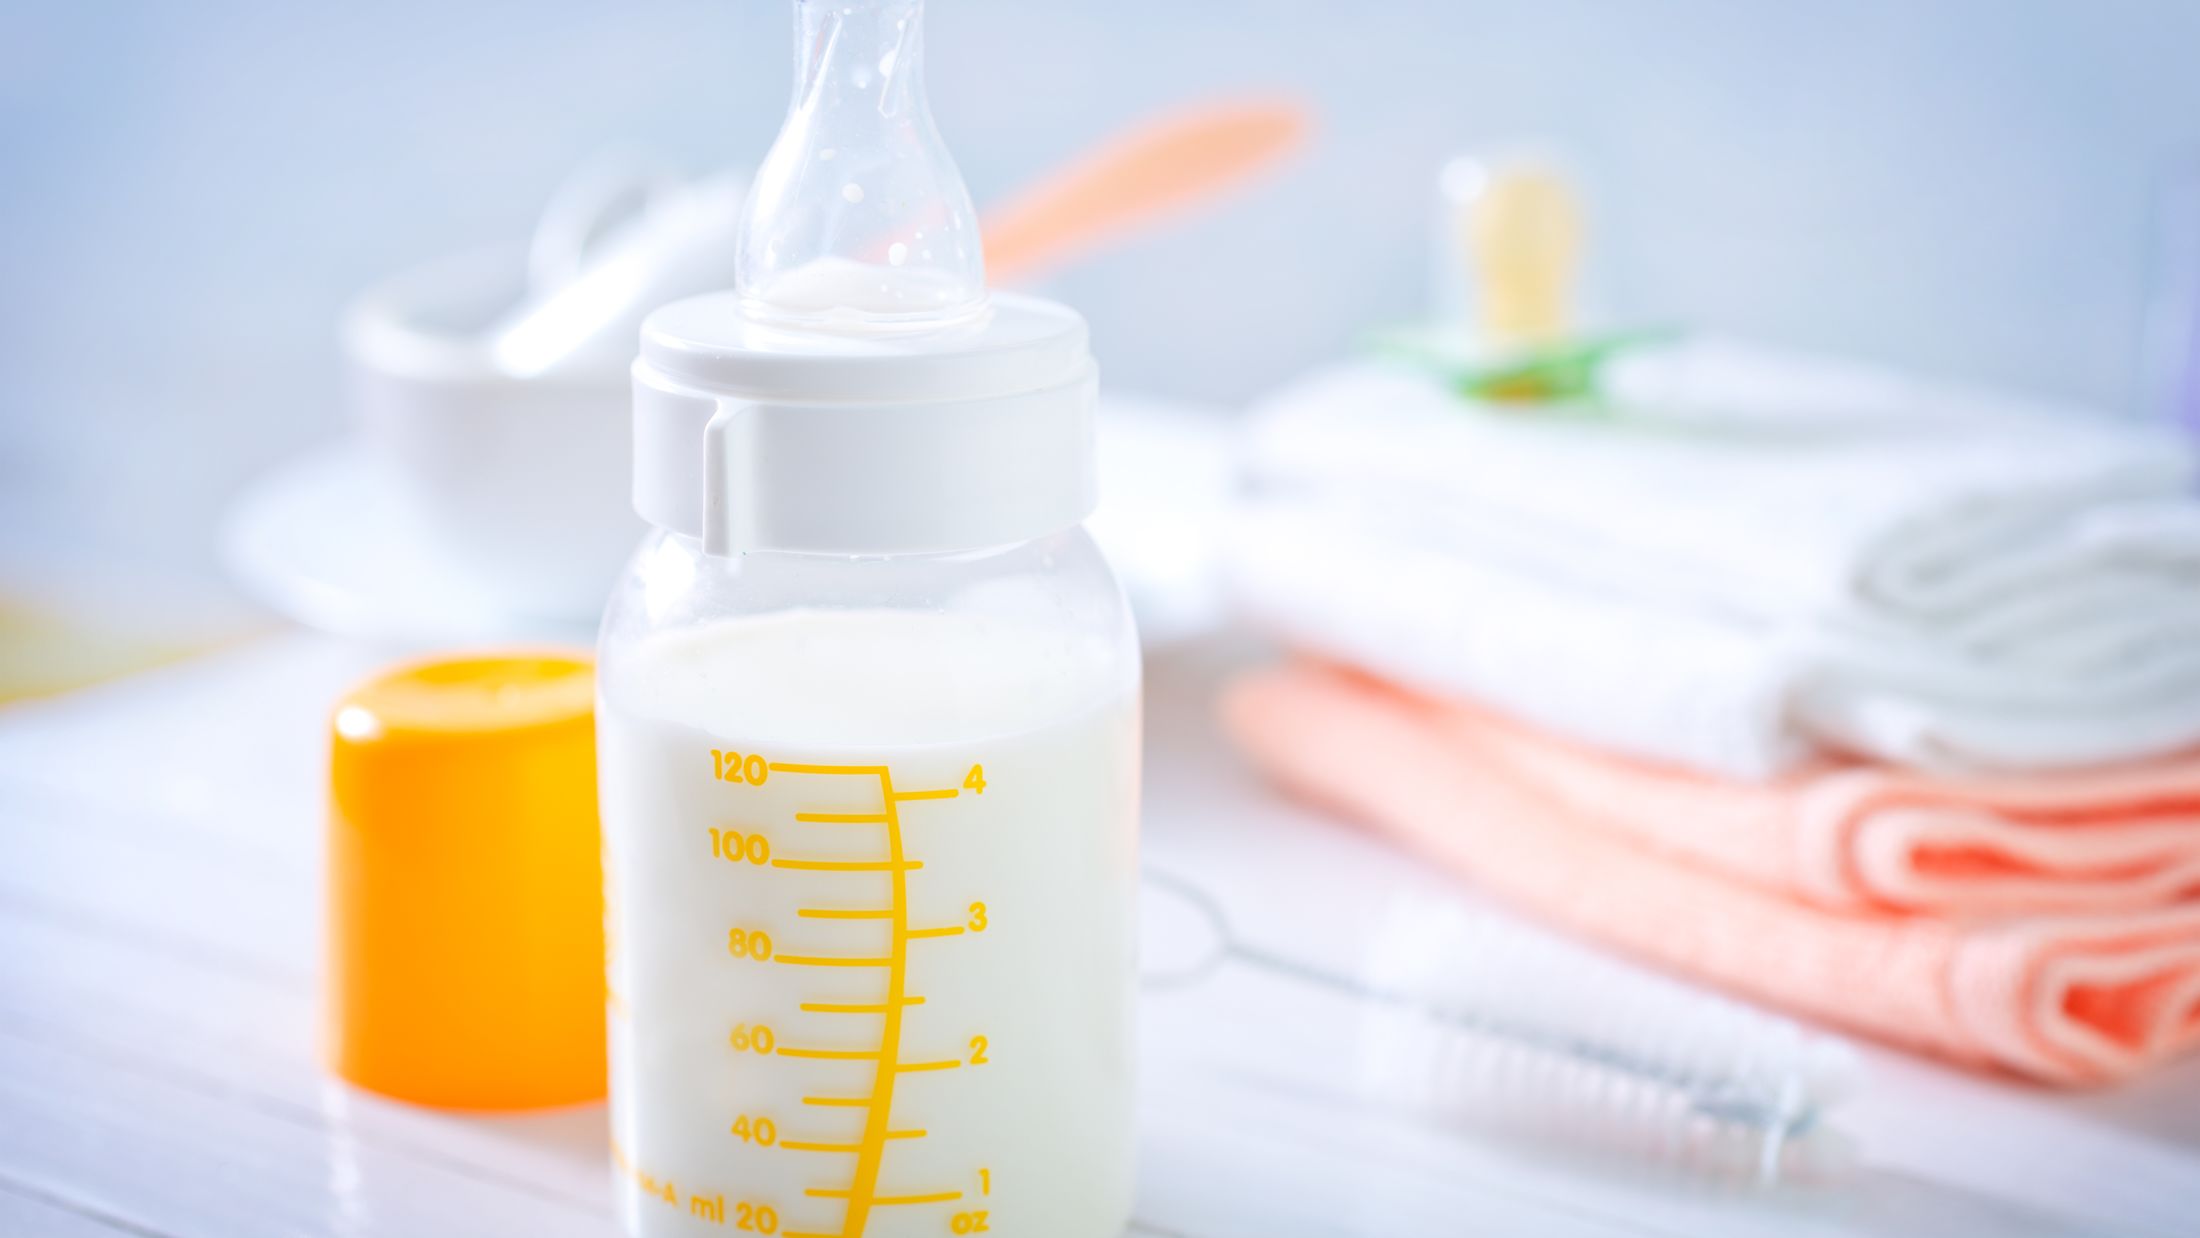 milk in baby bottle; Shutterstock ID 176628509; PO: Project Italy - Facilities images; Job: Project Italy - Facilities images; Client: H&J/Citalia